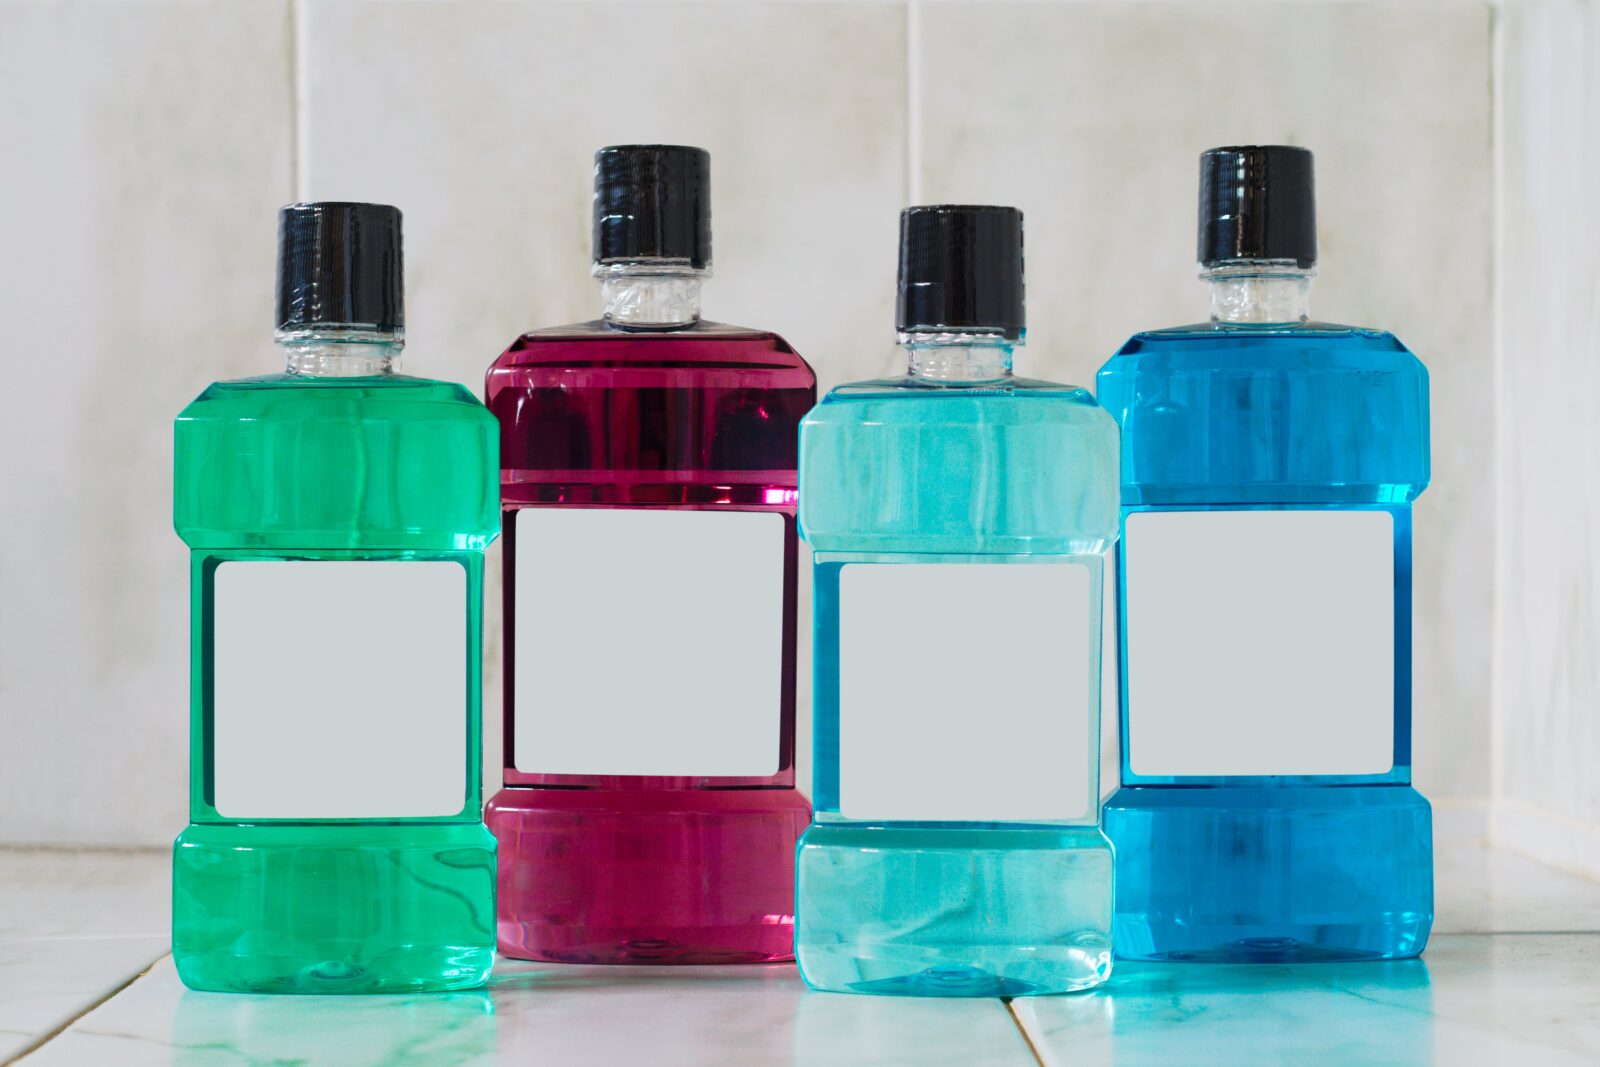 mouthwash containers